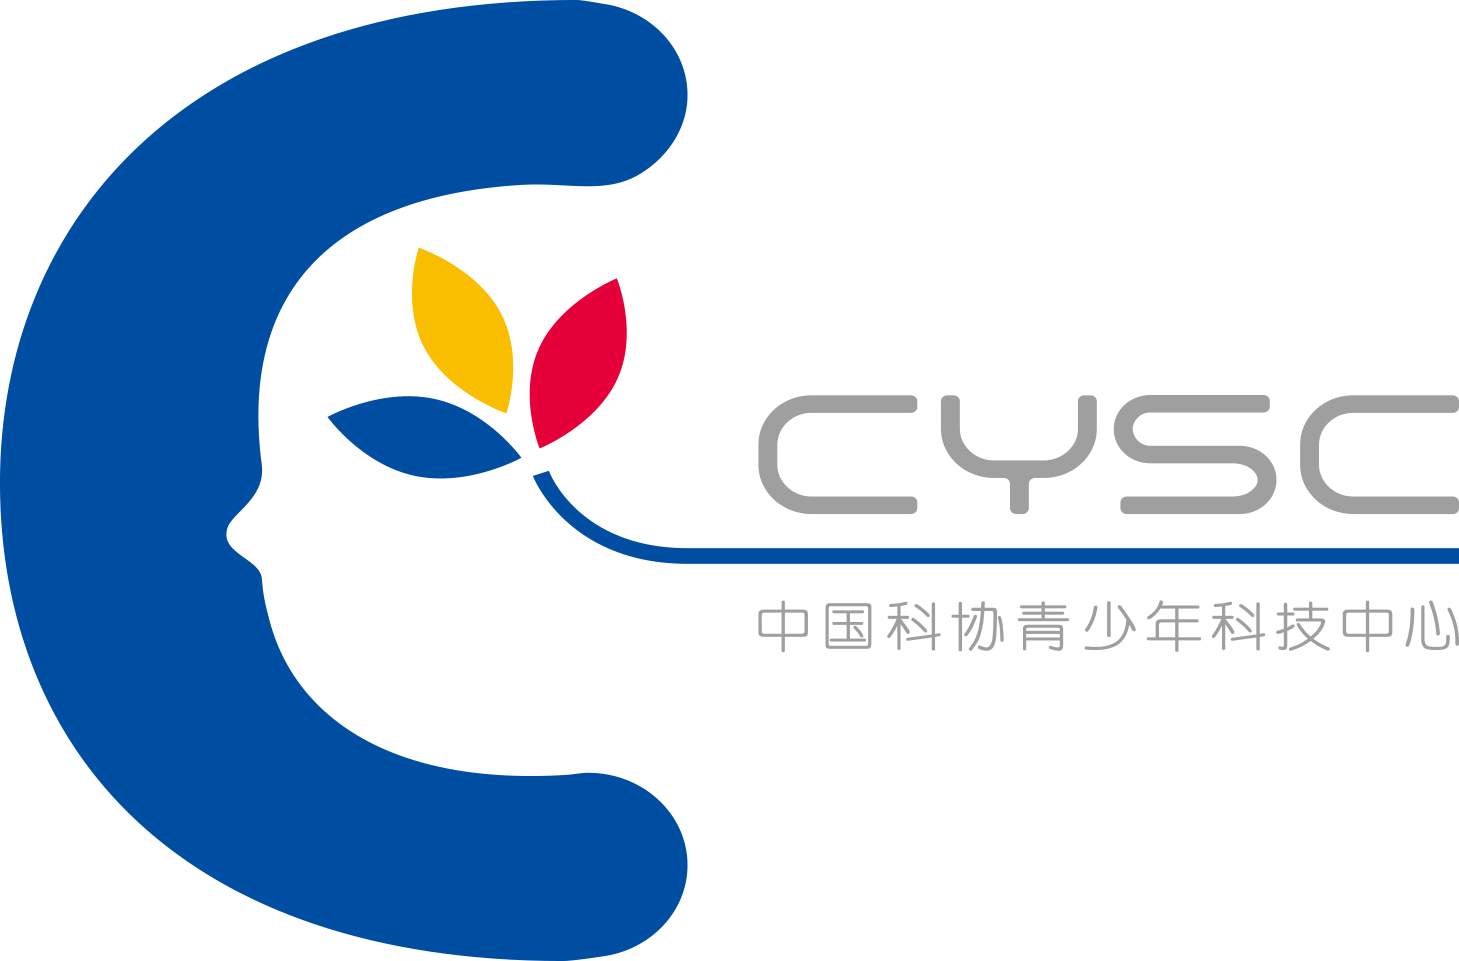 Children & Youth Science Center (CYSC) Logo 